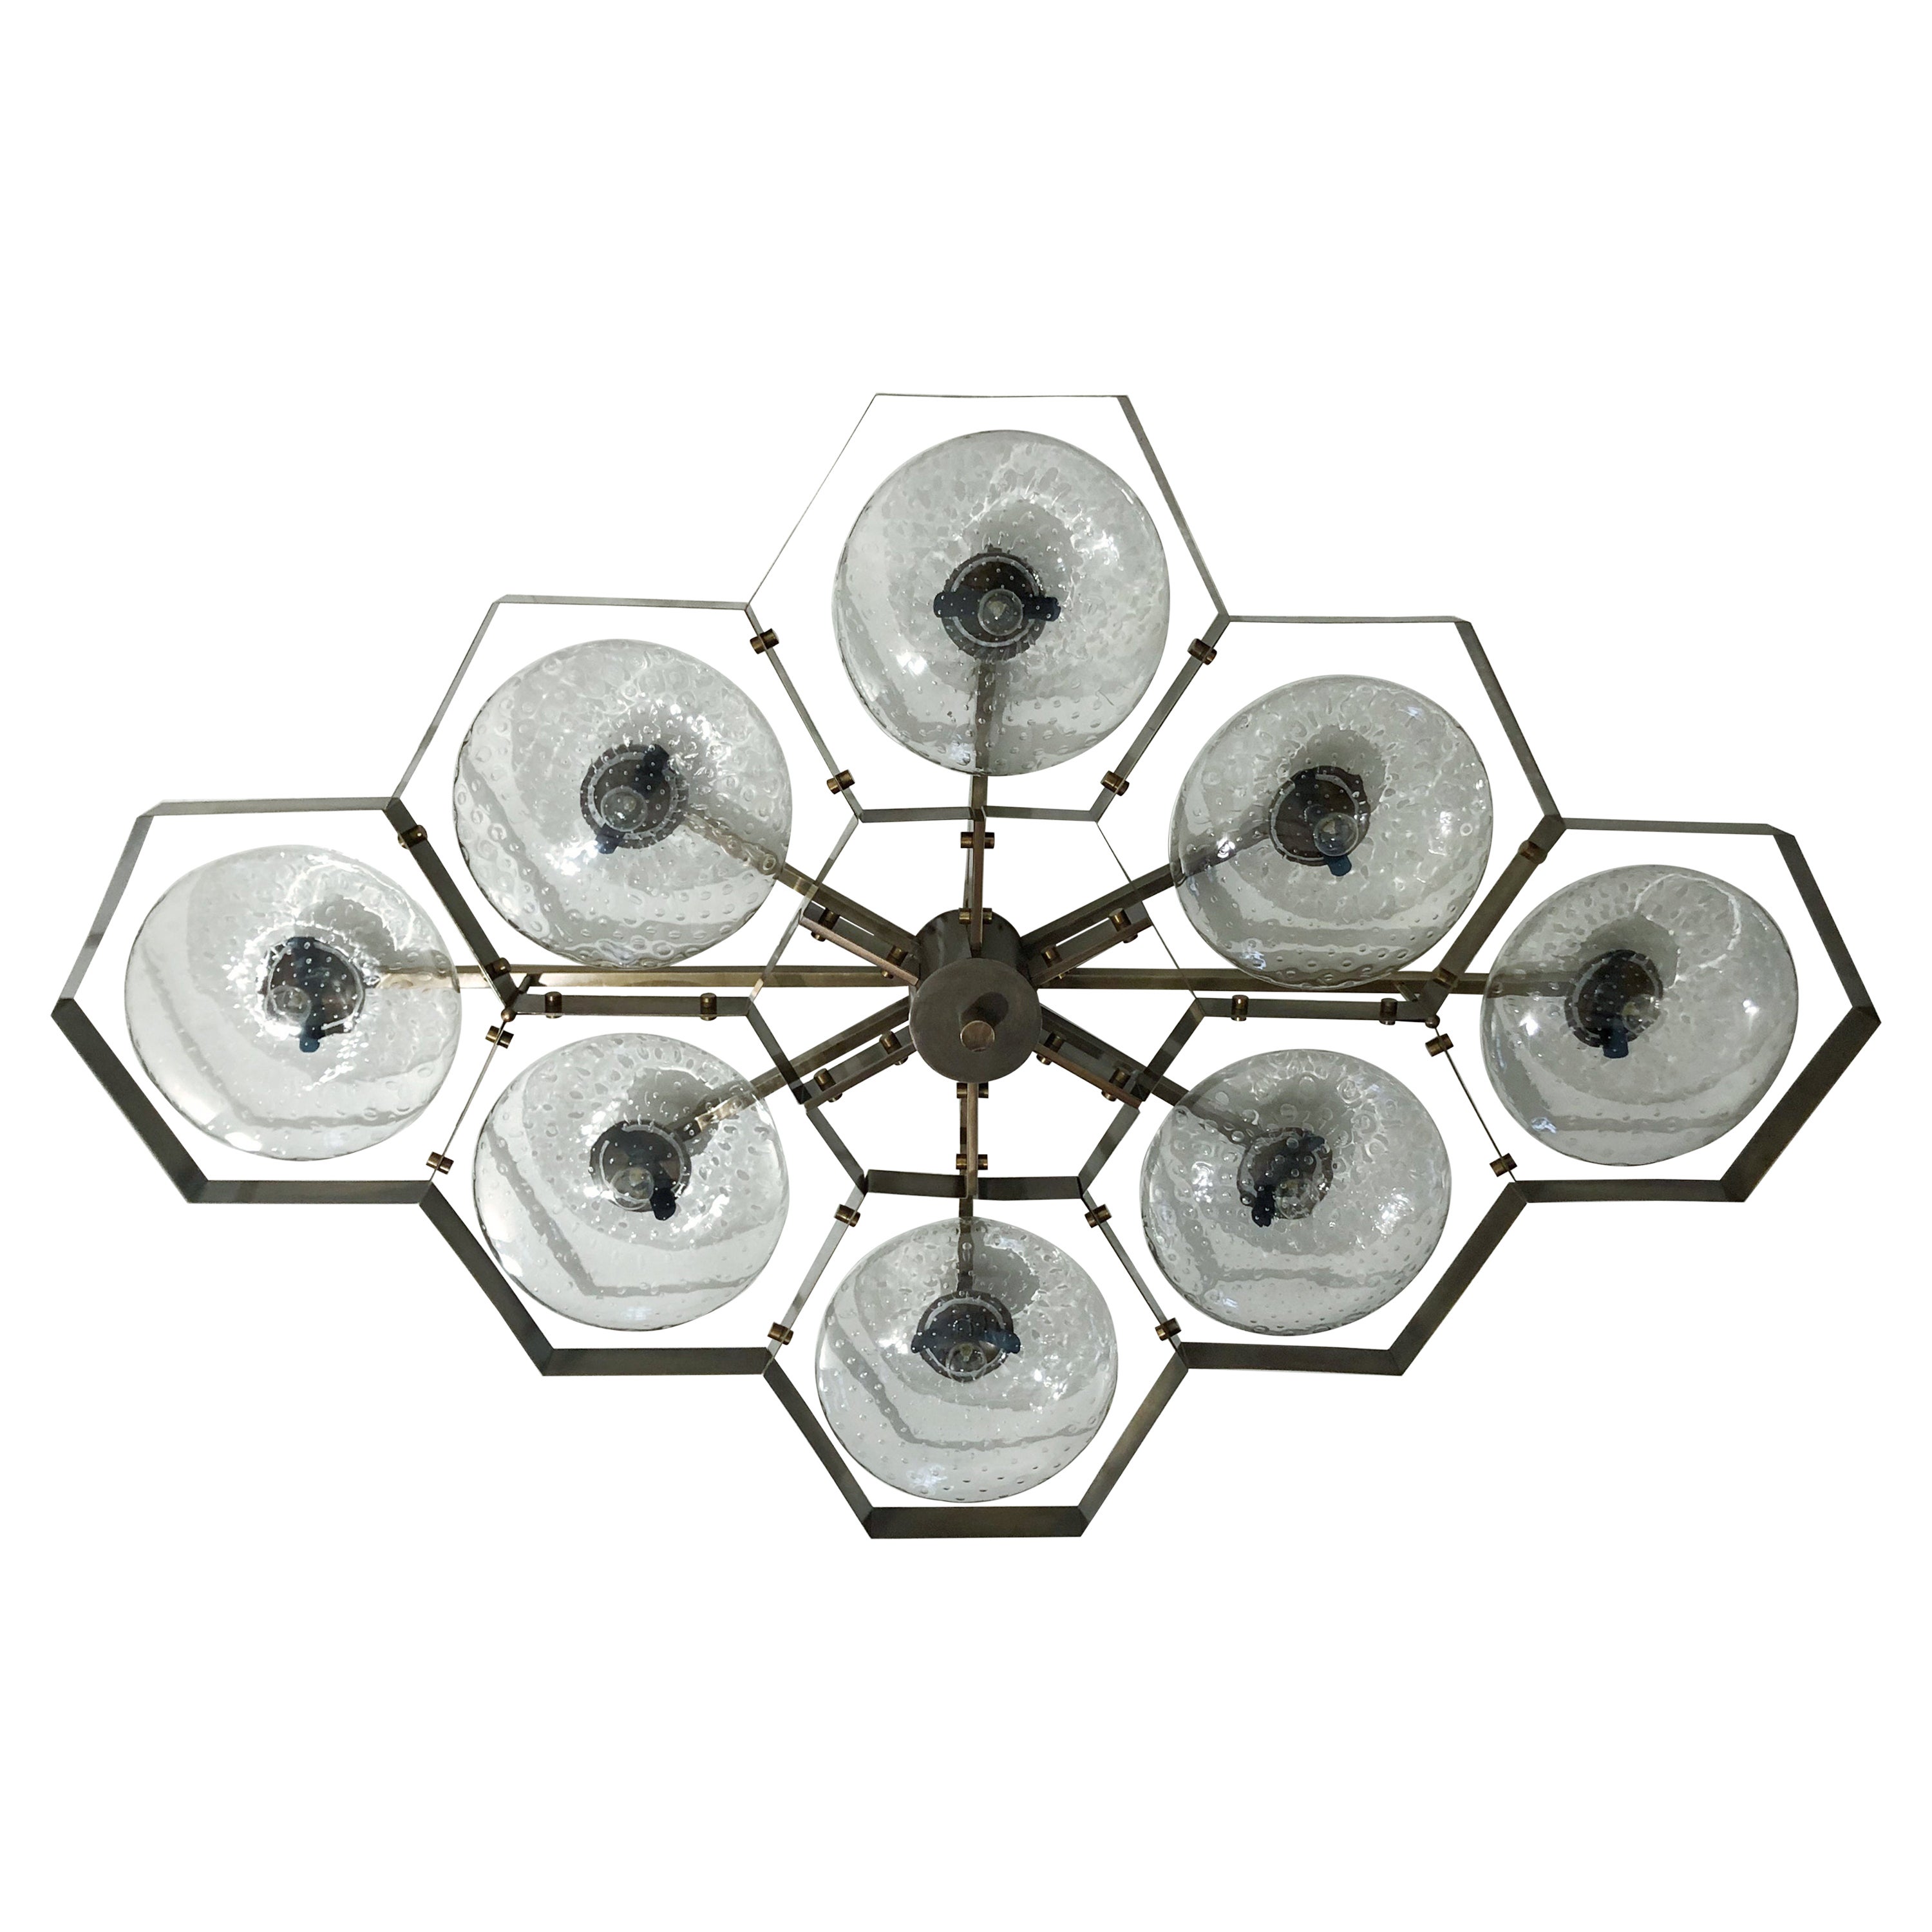 Italian flush mount with Murano glass shades mounted on solid brass frame / Made in Italy
Designed by Fabio Ltd, inspired by Angelo Lelli and Arredoluce styles
8 lights / E12 or E14 / max 40W each
Measures: Length 65 inches, width 42.5 inches,